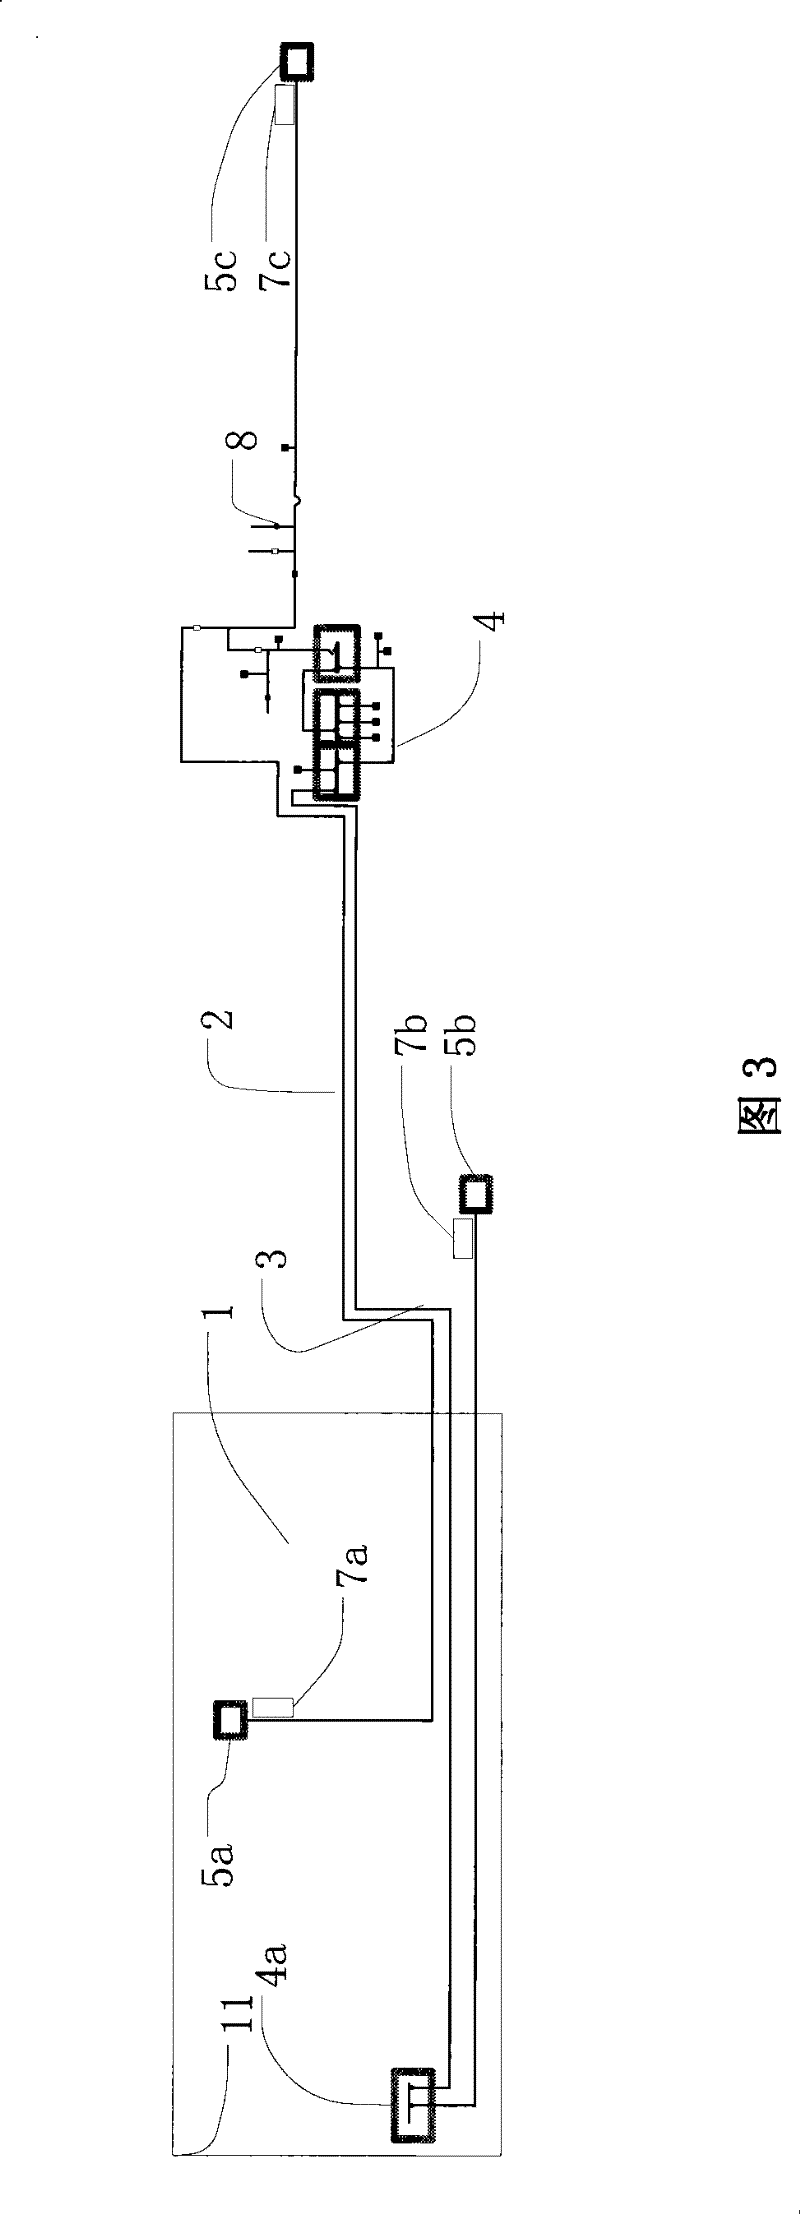 Electric power scheduling simulation system electric network display process